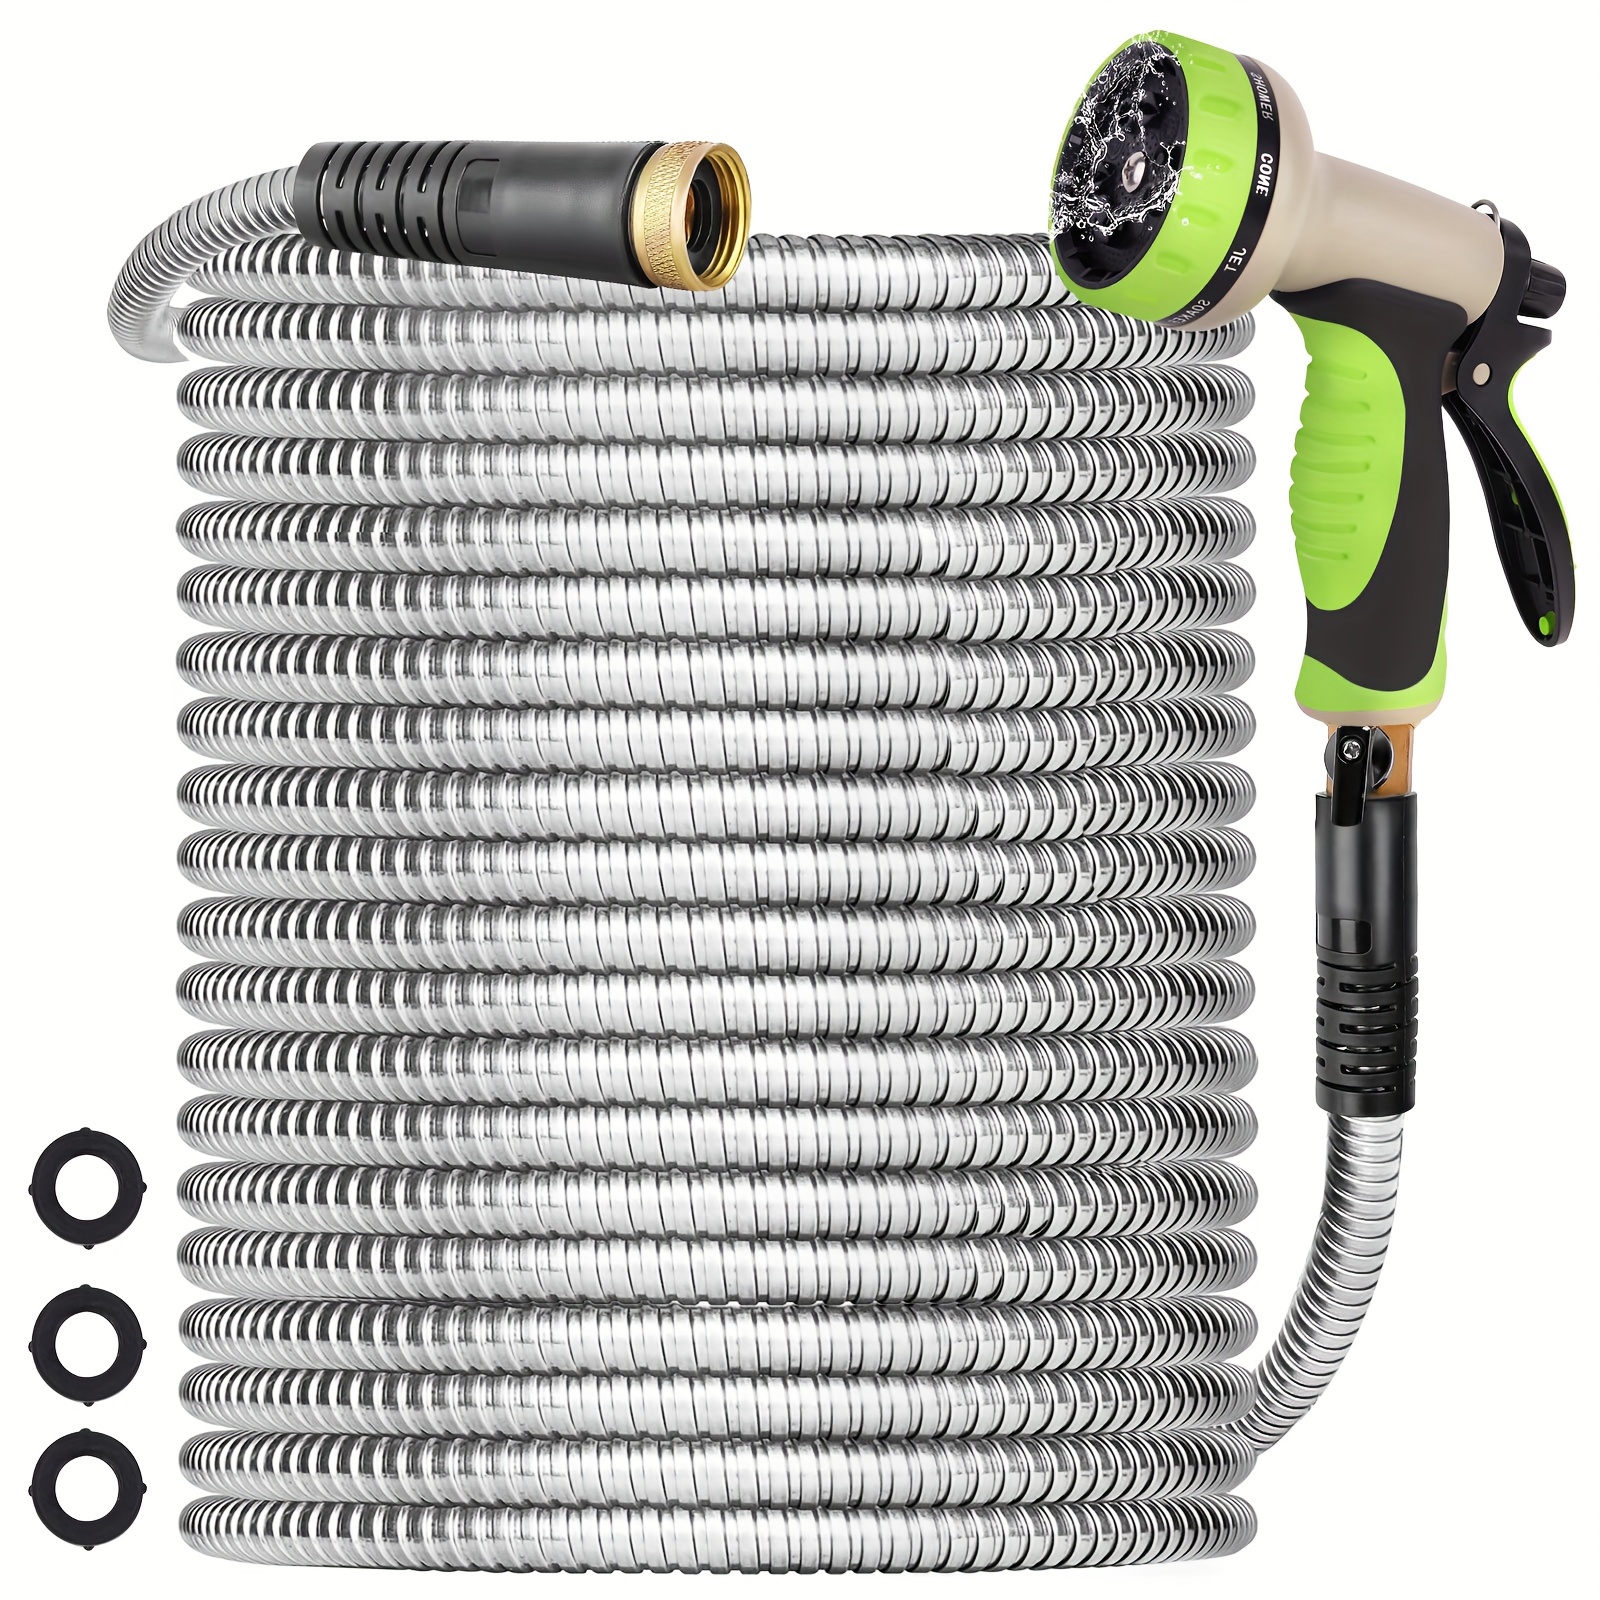 

75ft Metal Garden Hose Stainless Steel Heavy Duty Lightweight Flexible Water Hose With 3/4'' Fitting 10 Function Nozzle Leak Puncture Proof, No Kink & , Durable Outdoor Pipe Yard Lawn